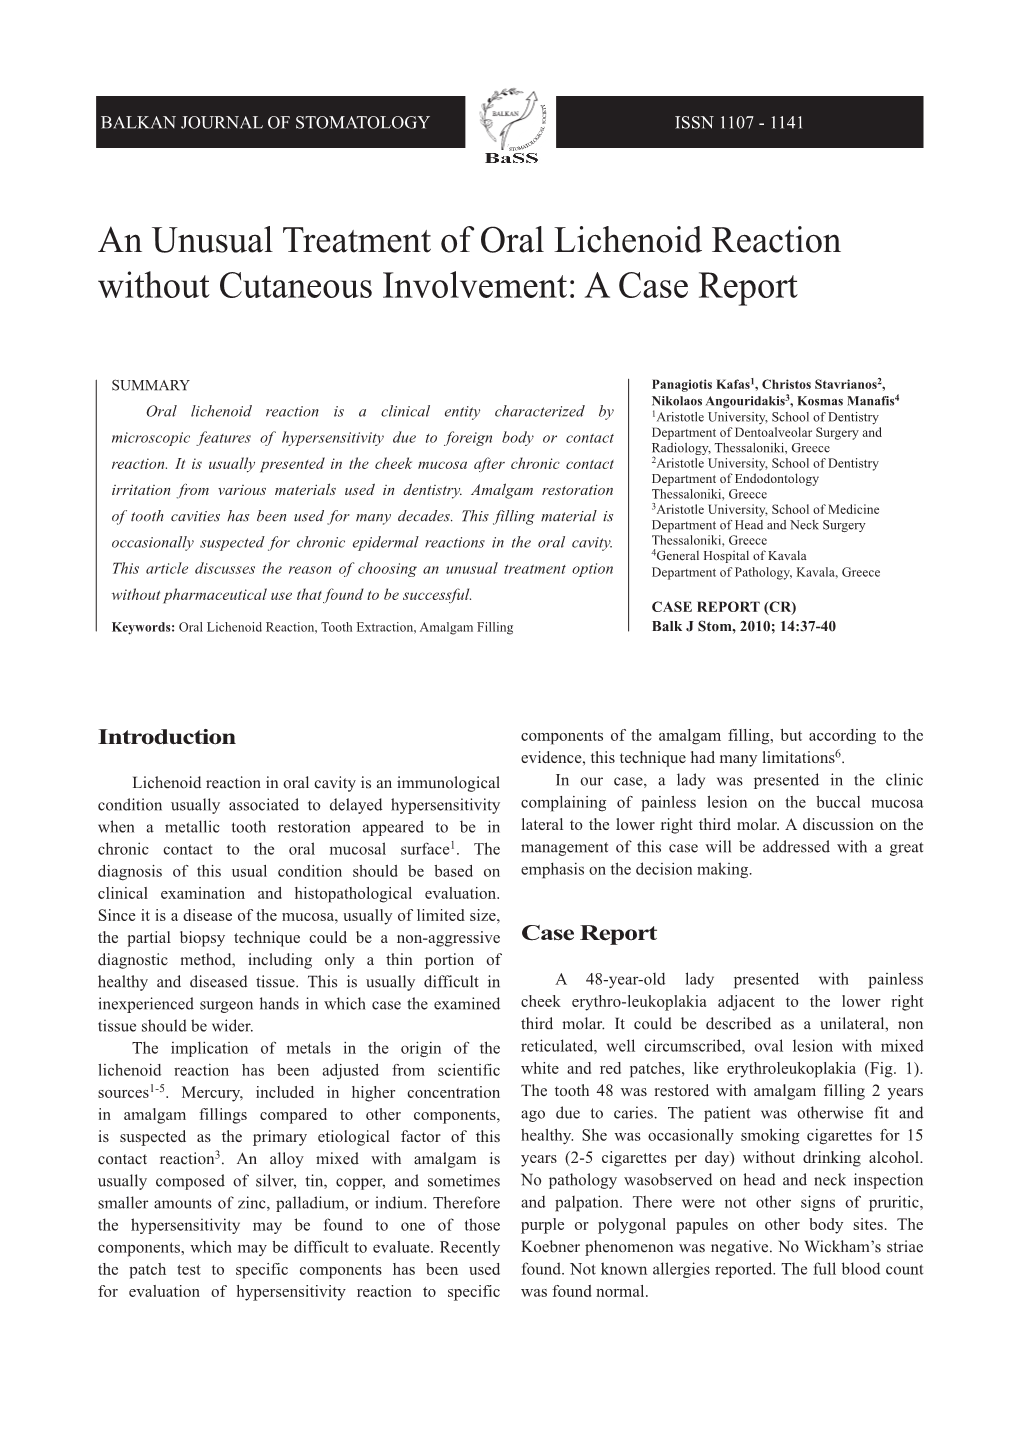 An Unusual Treatment of Oral Lichenoid Reaction Without Cutaneous Involvement: a Case Report